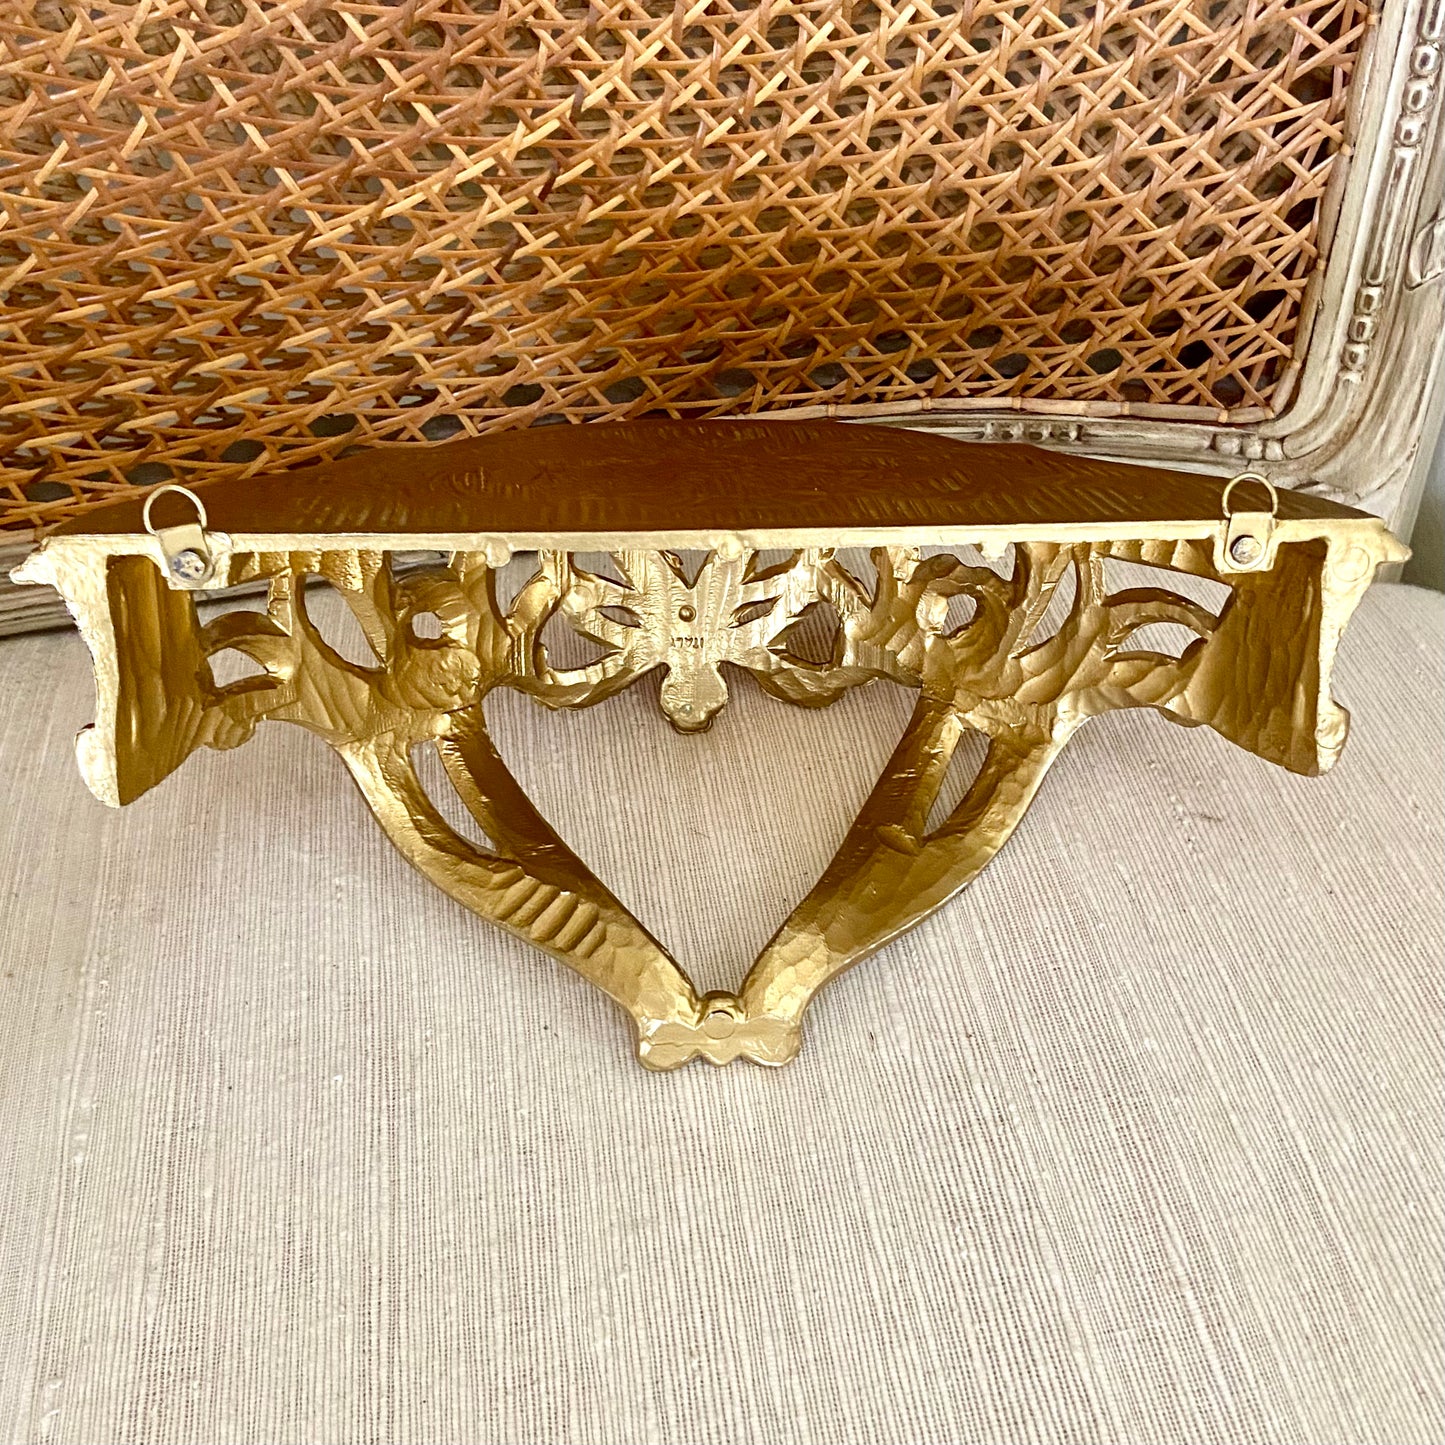 Vintage gold ornate bow wall sconce, 12x6” -Pristine!